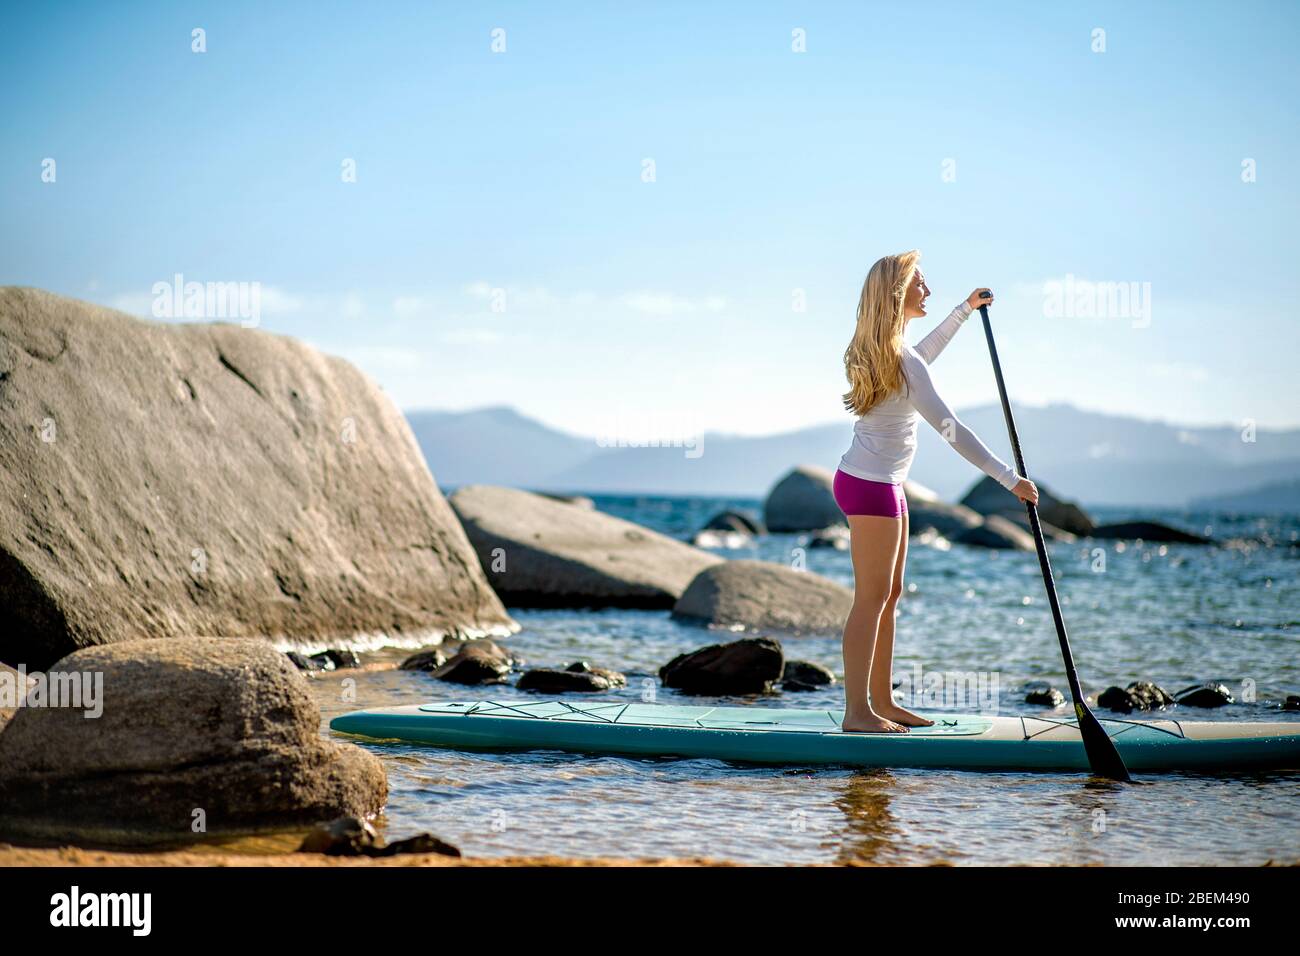 Active young woman paddle boarding across a lake Stock Photo